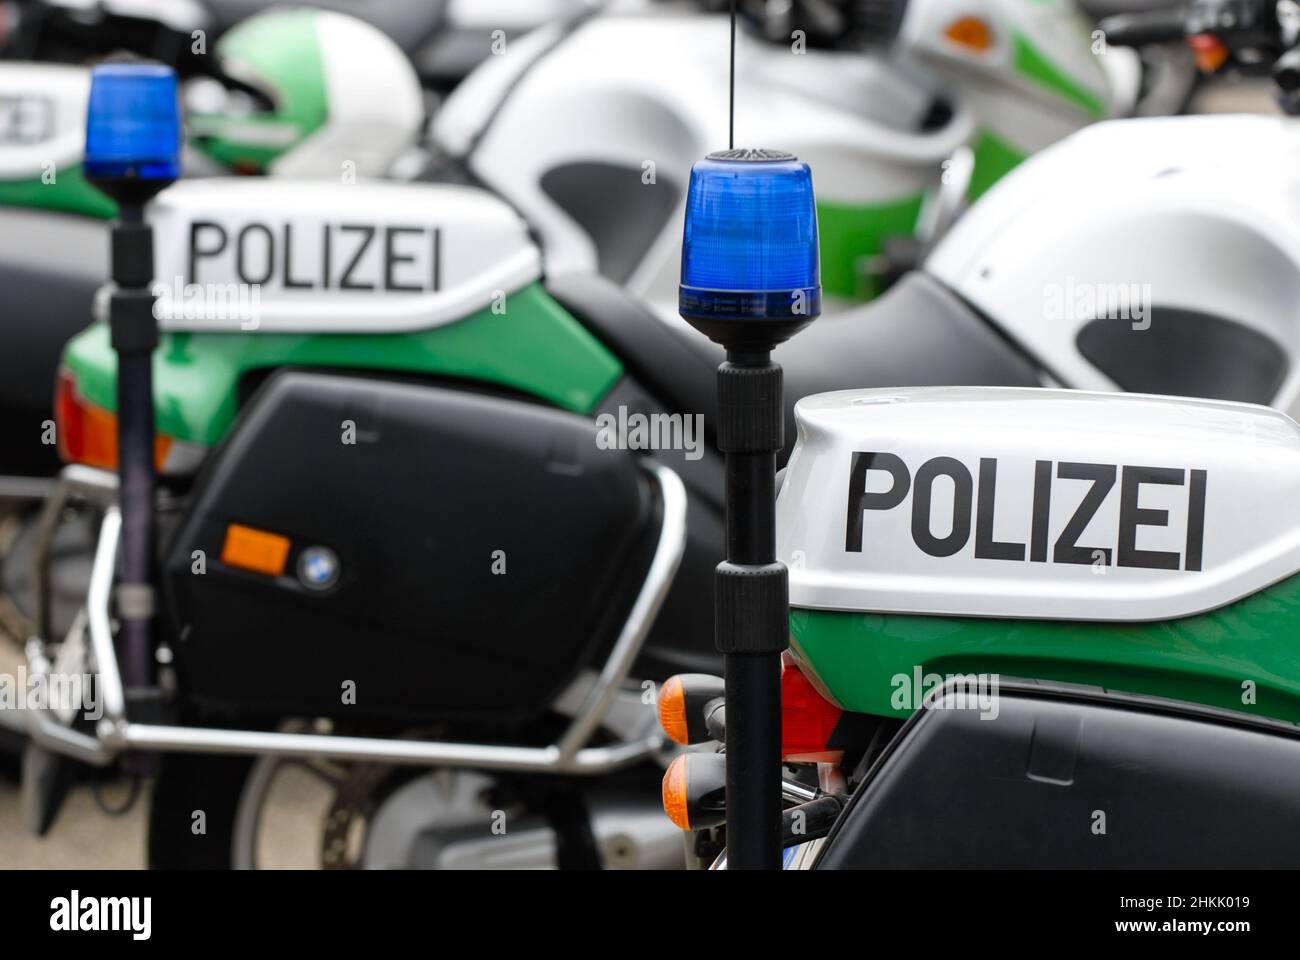 police motorcycles, Germany Stock Photo